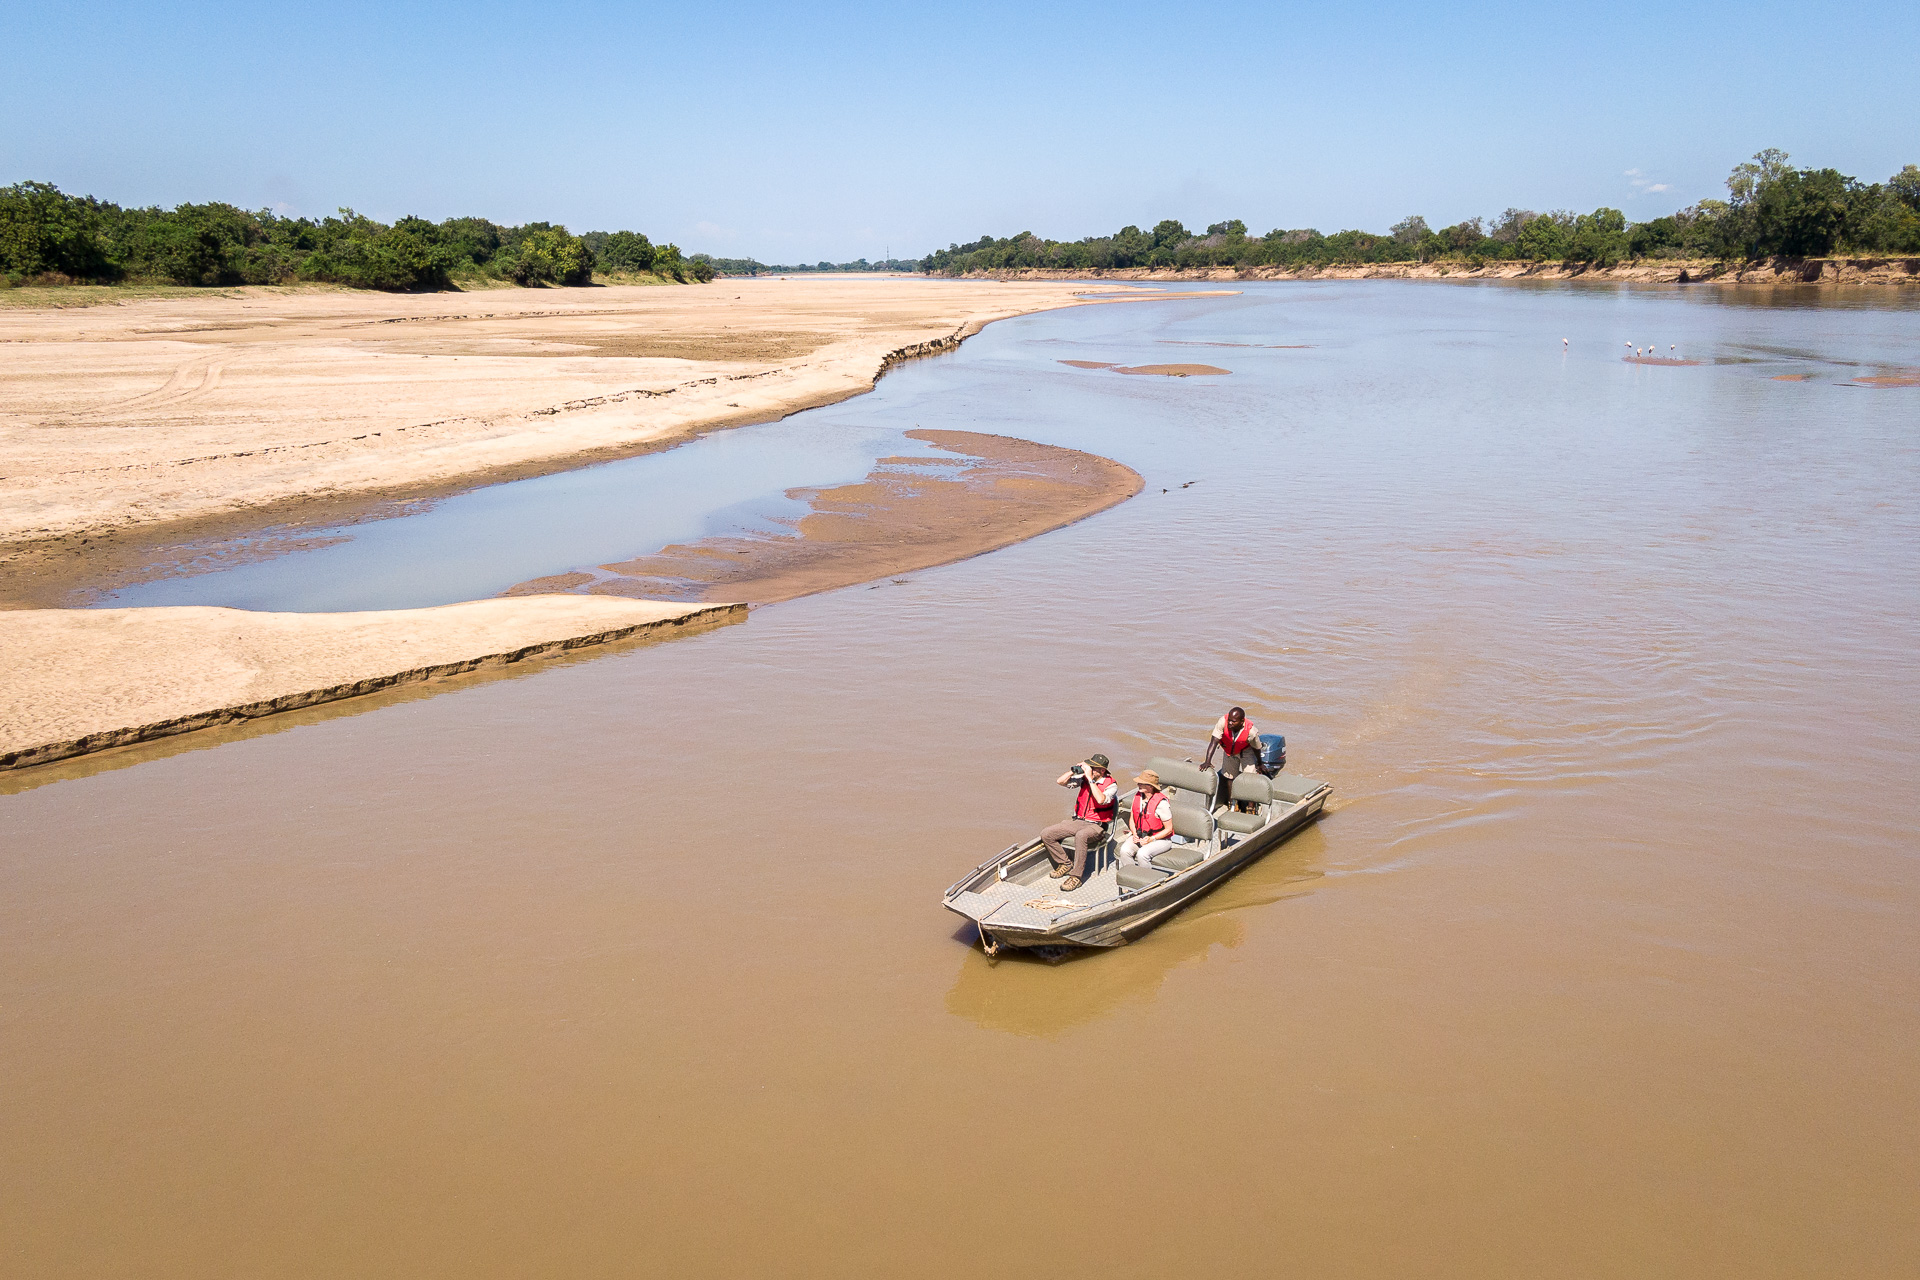 Boating on the Luangwa River